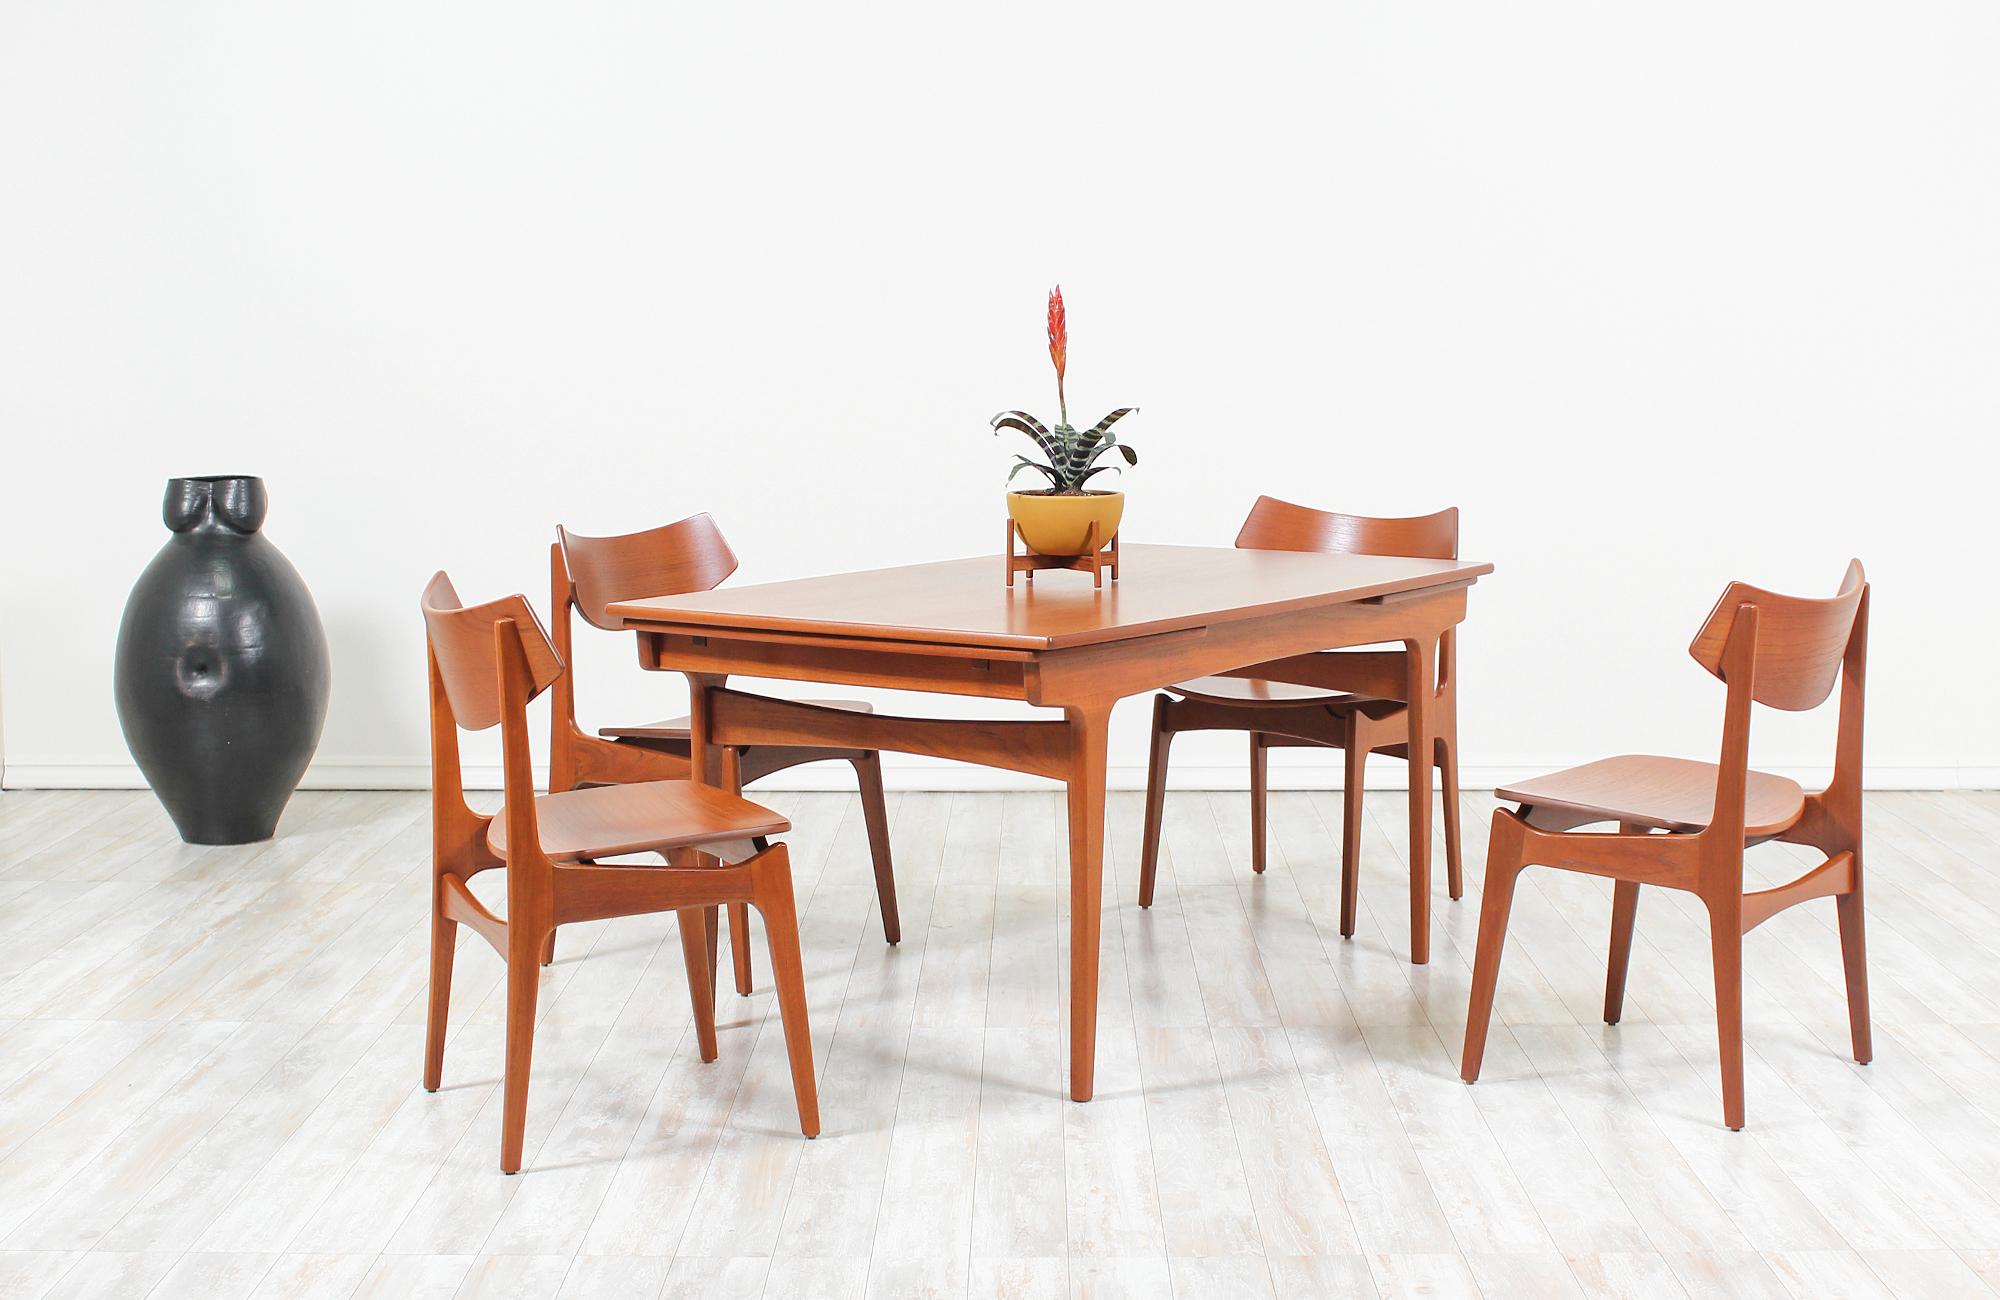 Set of four dining chairs designed by Erik Buch for Funder-Schmidt & Madsen in Denmark, circa 1960s. A dynamic Danish modern set of dining chairs featuring a sculptural solid teak wood frame with clean, geometric lines and natural wood grain detail